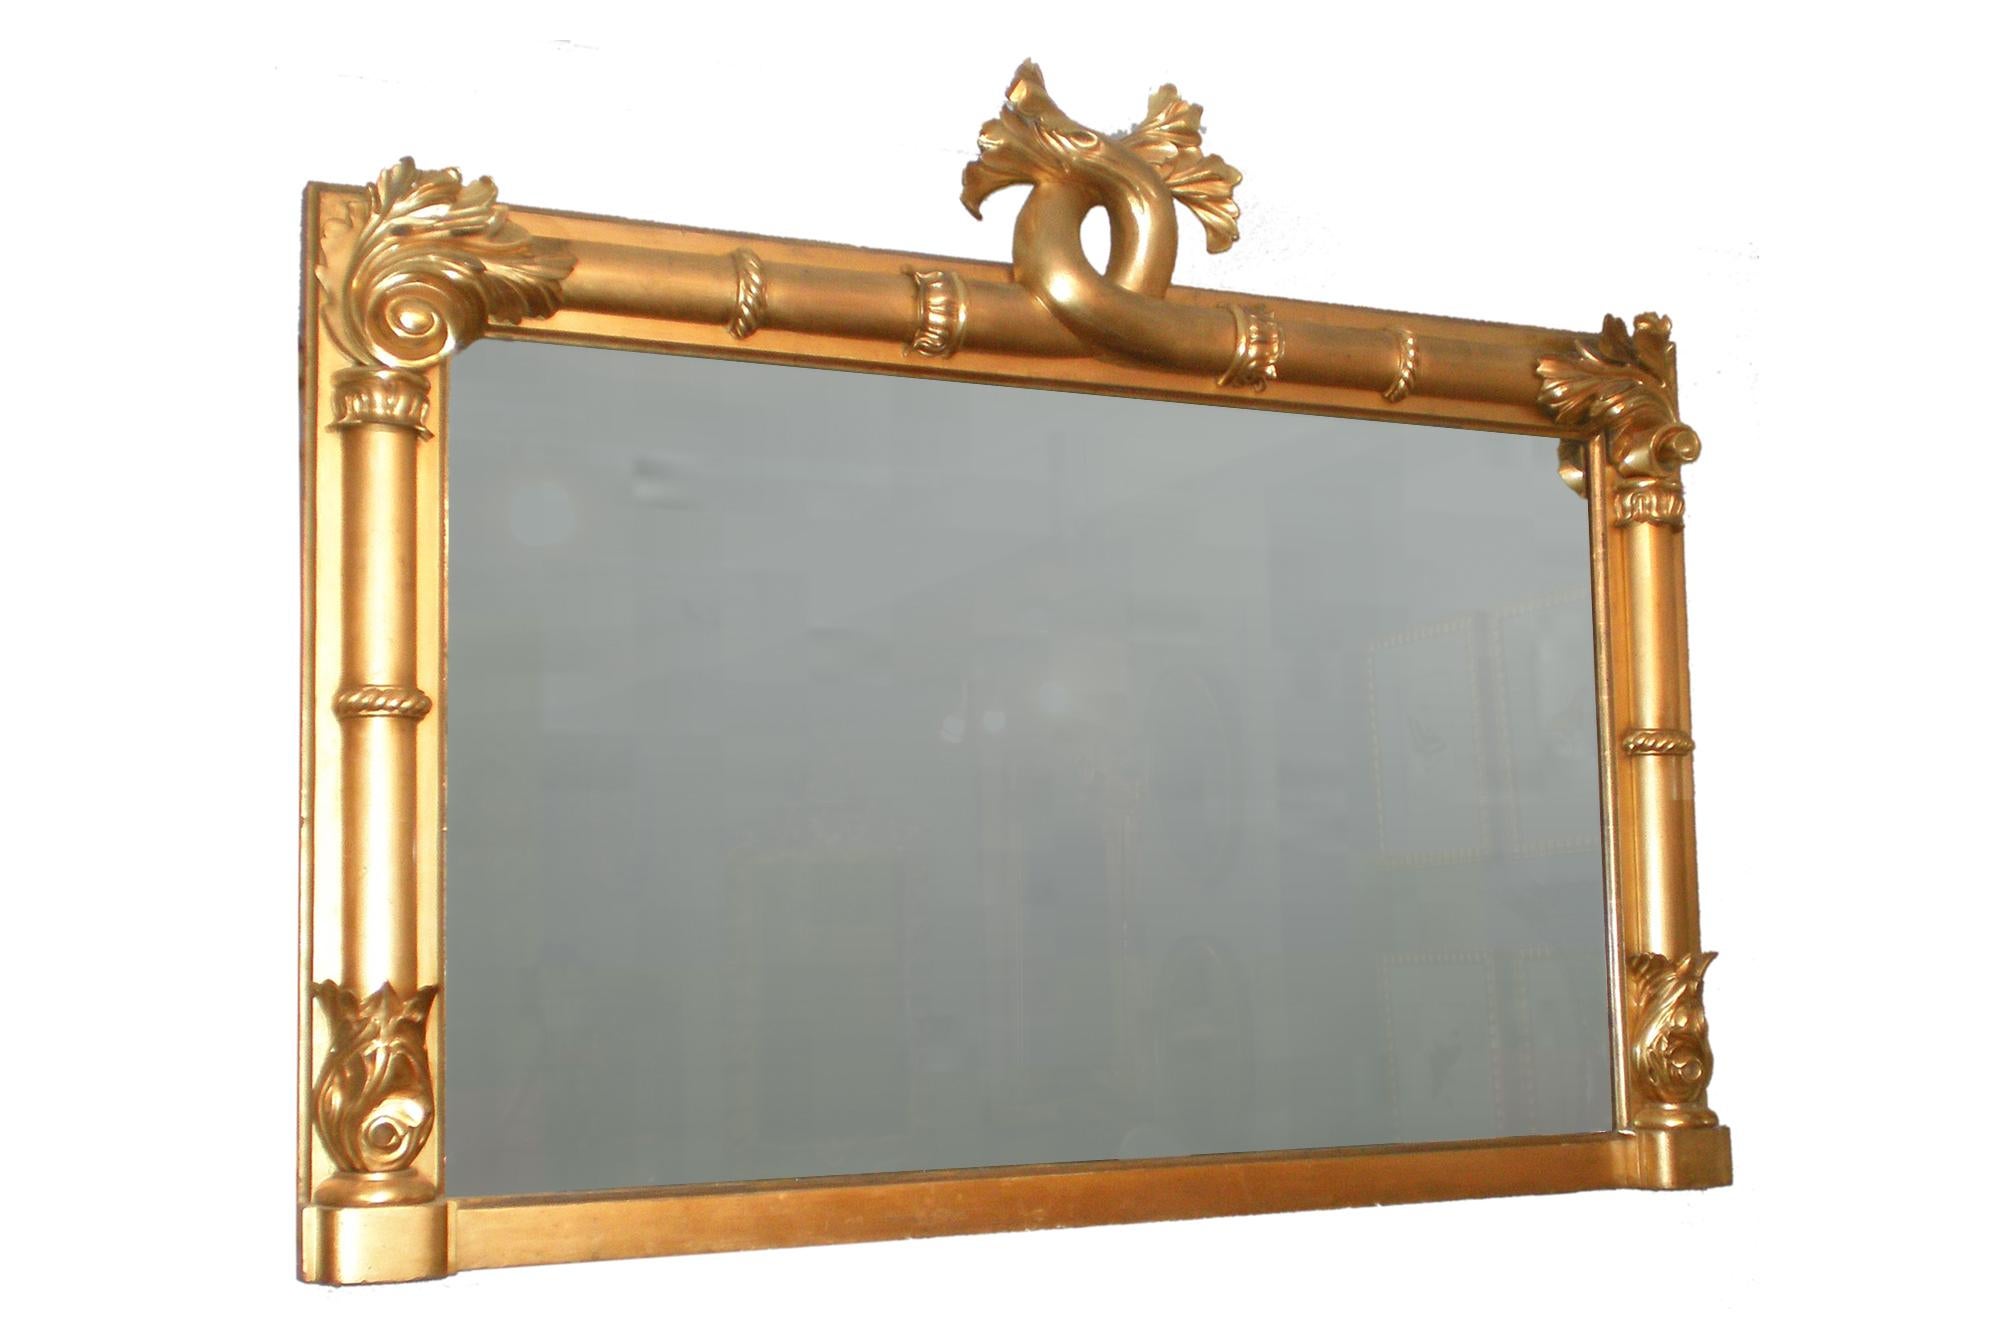 19th Century William IV English large rectangular ornamental mirror. The sides and upper edge within half columns with lotus and acanthus carving, with interlinked acanthus leaf crest above.